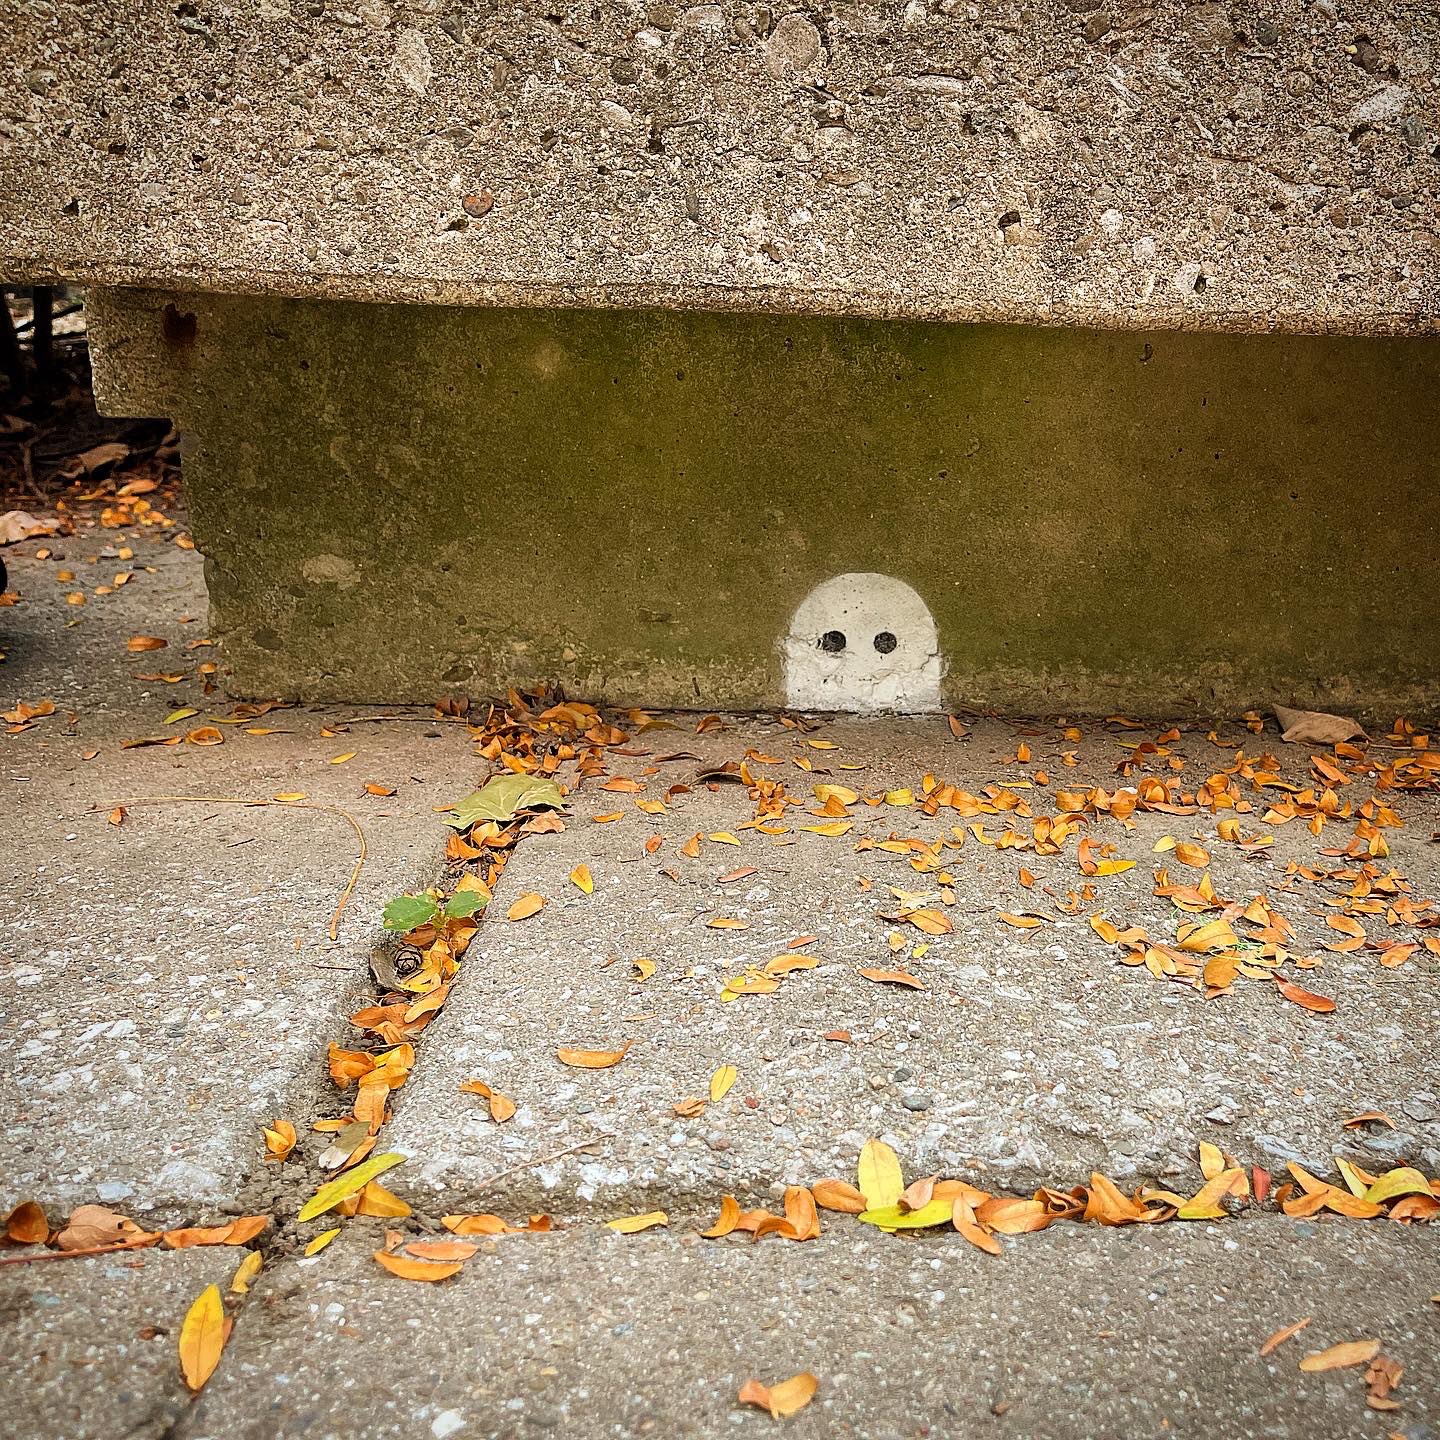 A small white ghost with black eyes is painted on the base of a cement bench, looking like it's peeking up from the ground.